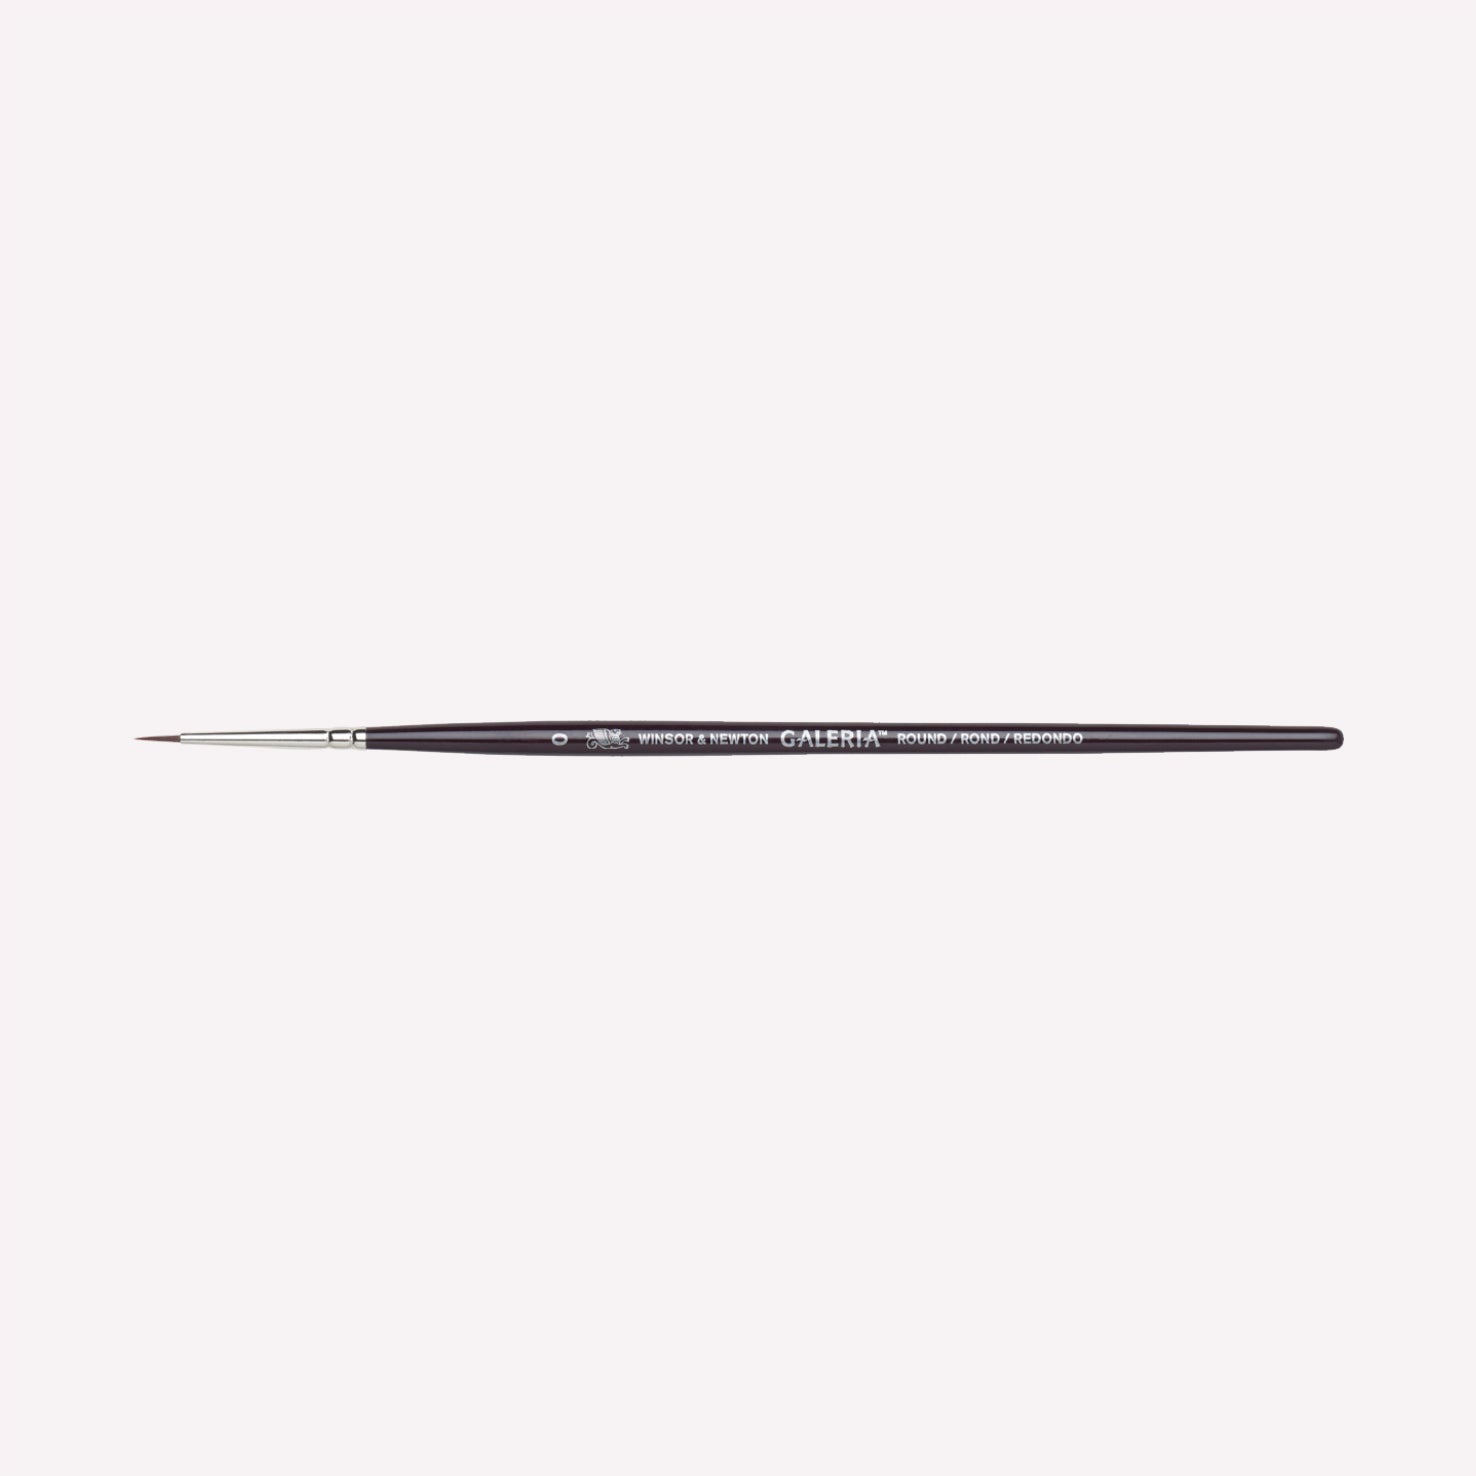 Winsor & Newton Galeria Round paintbrush in size 0. Brushes have synthetic filaments, and short wooden handles. 